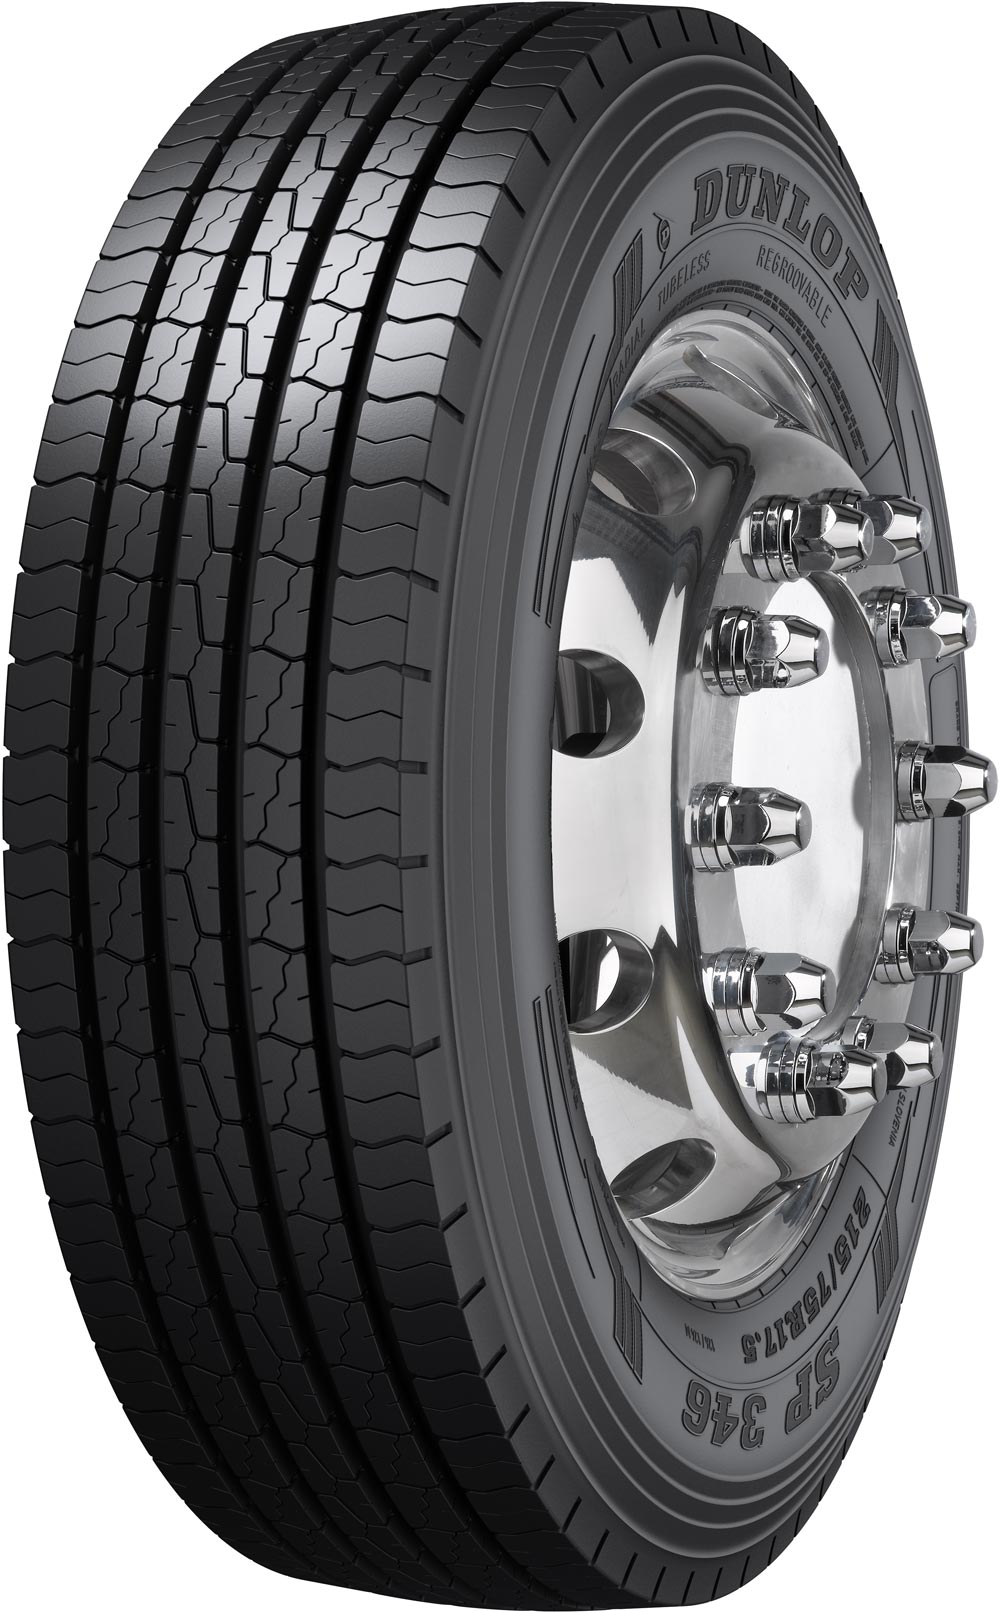 product_type-heavy_tires DUNLOP SP346 20 TL 385/65 R22.5 160K